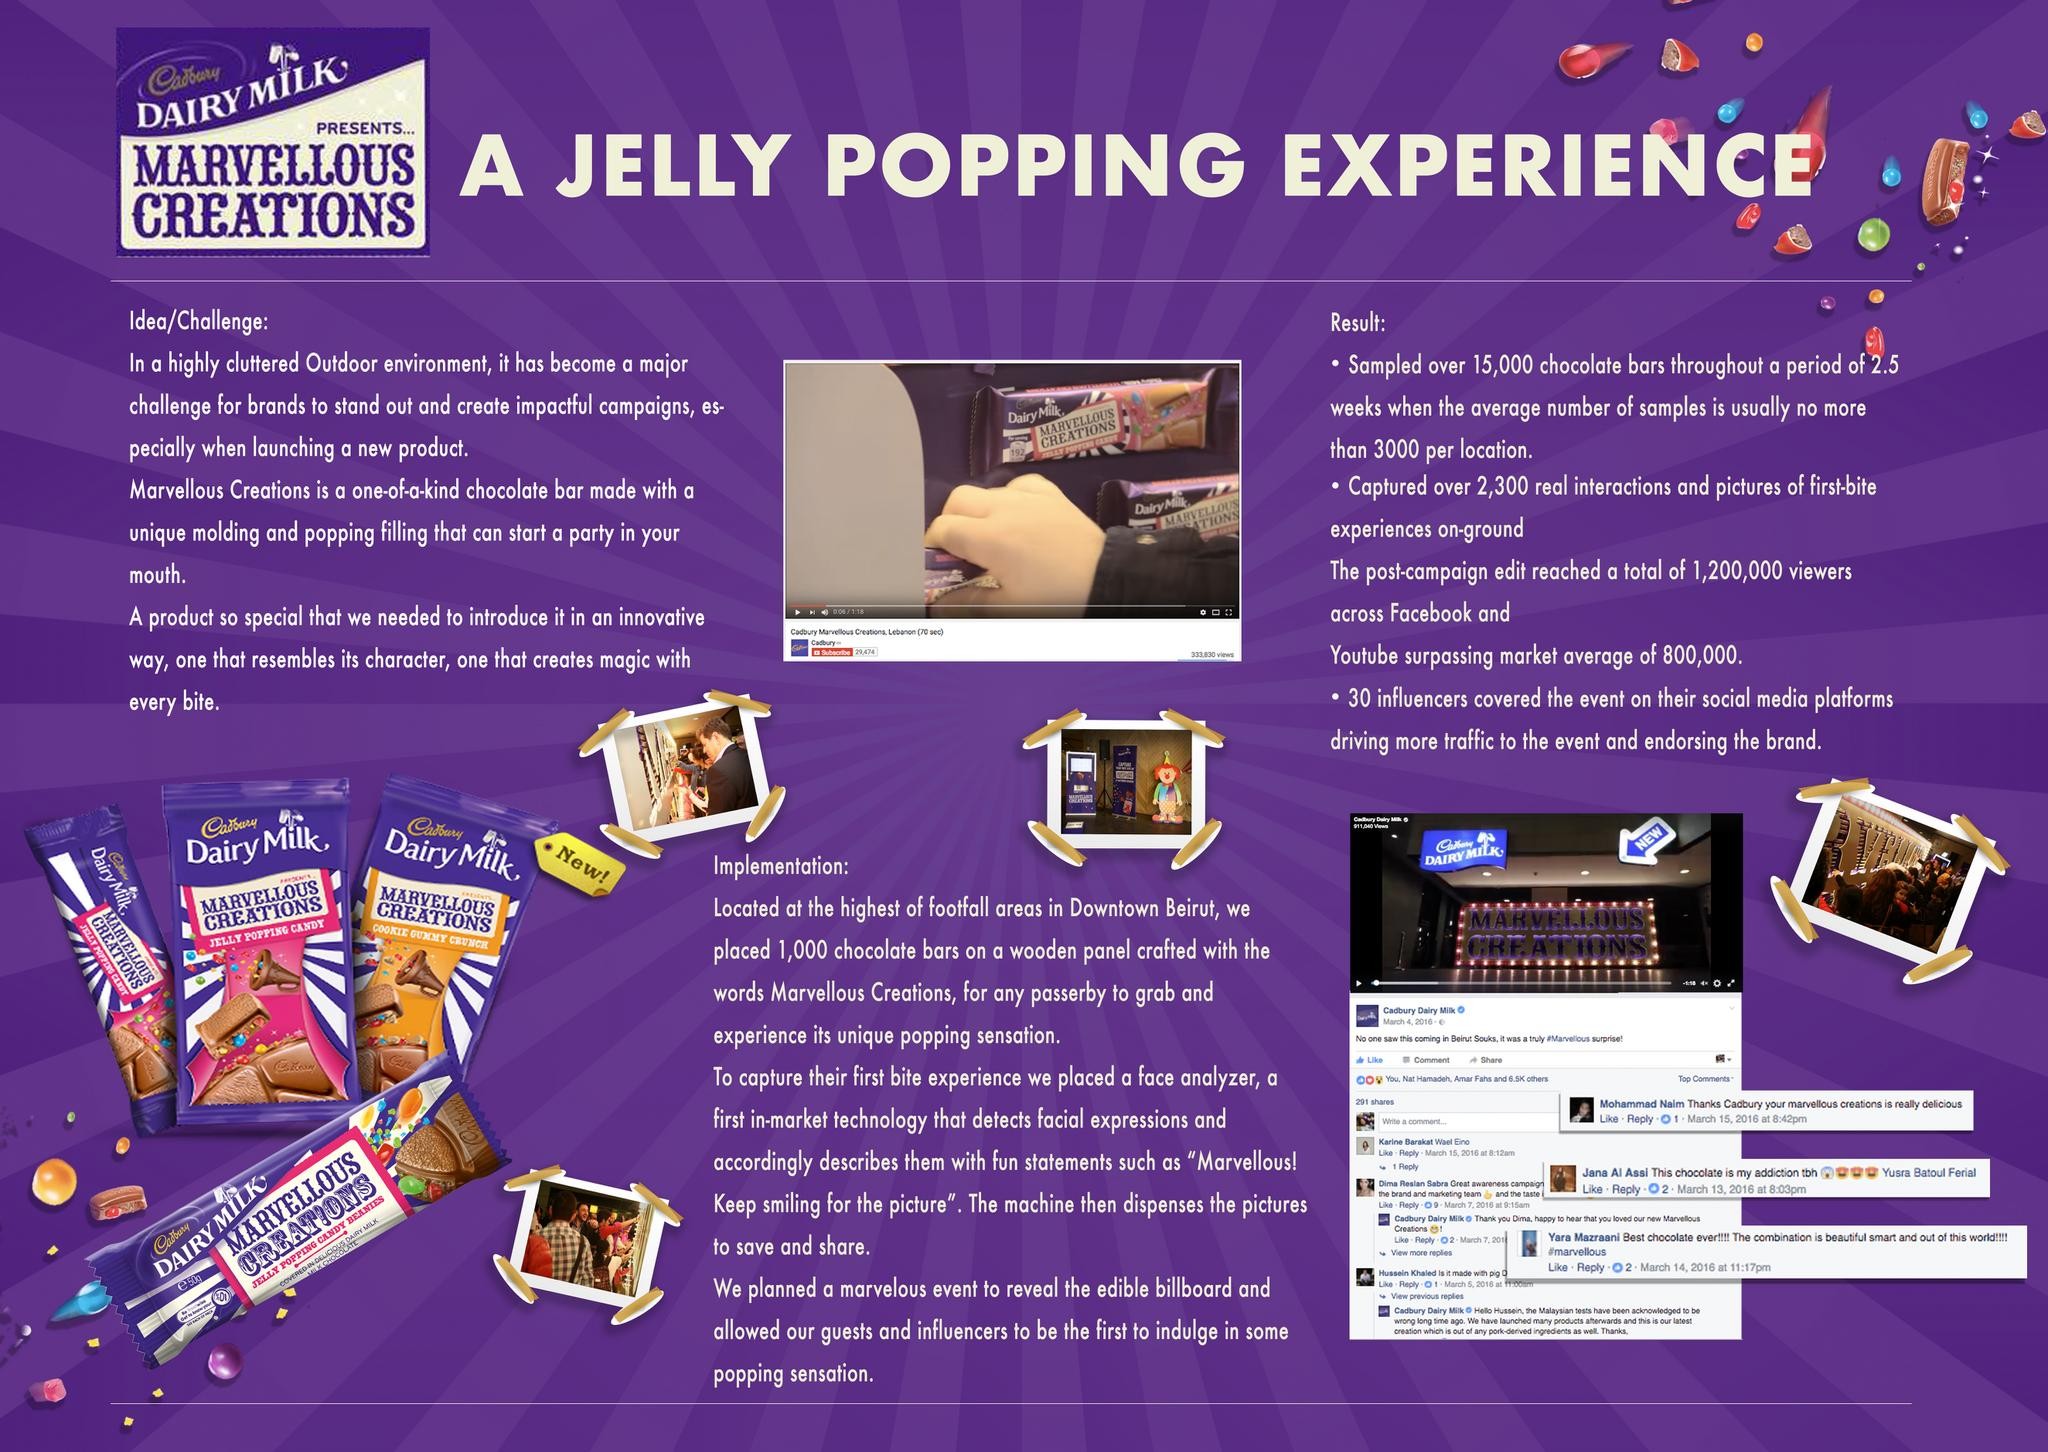 A Jelly Popping Experience